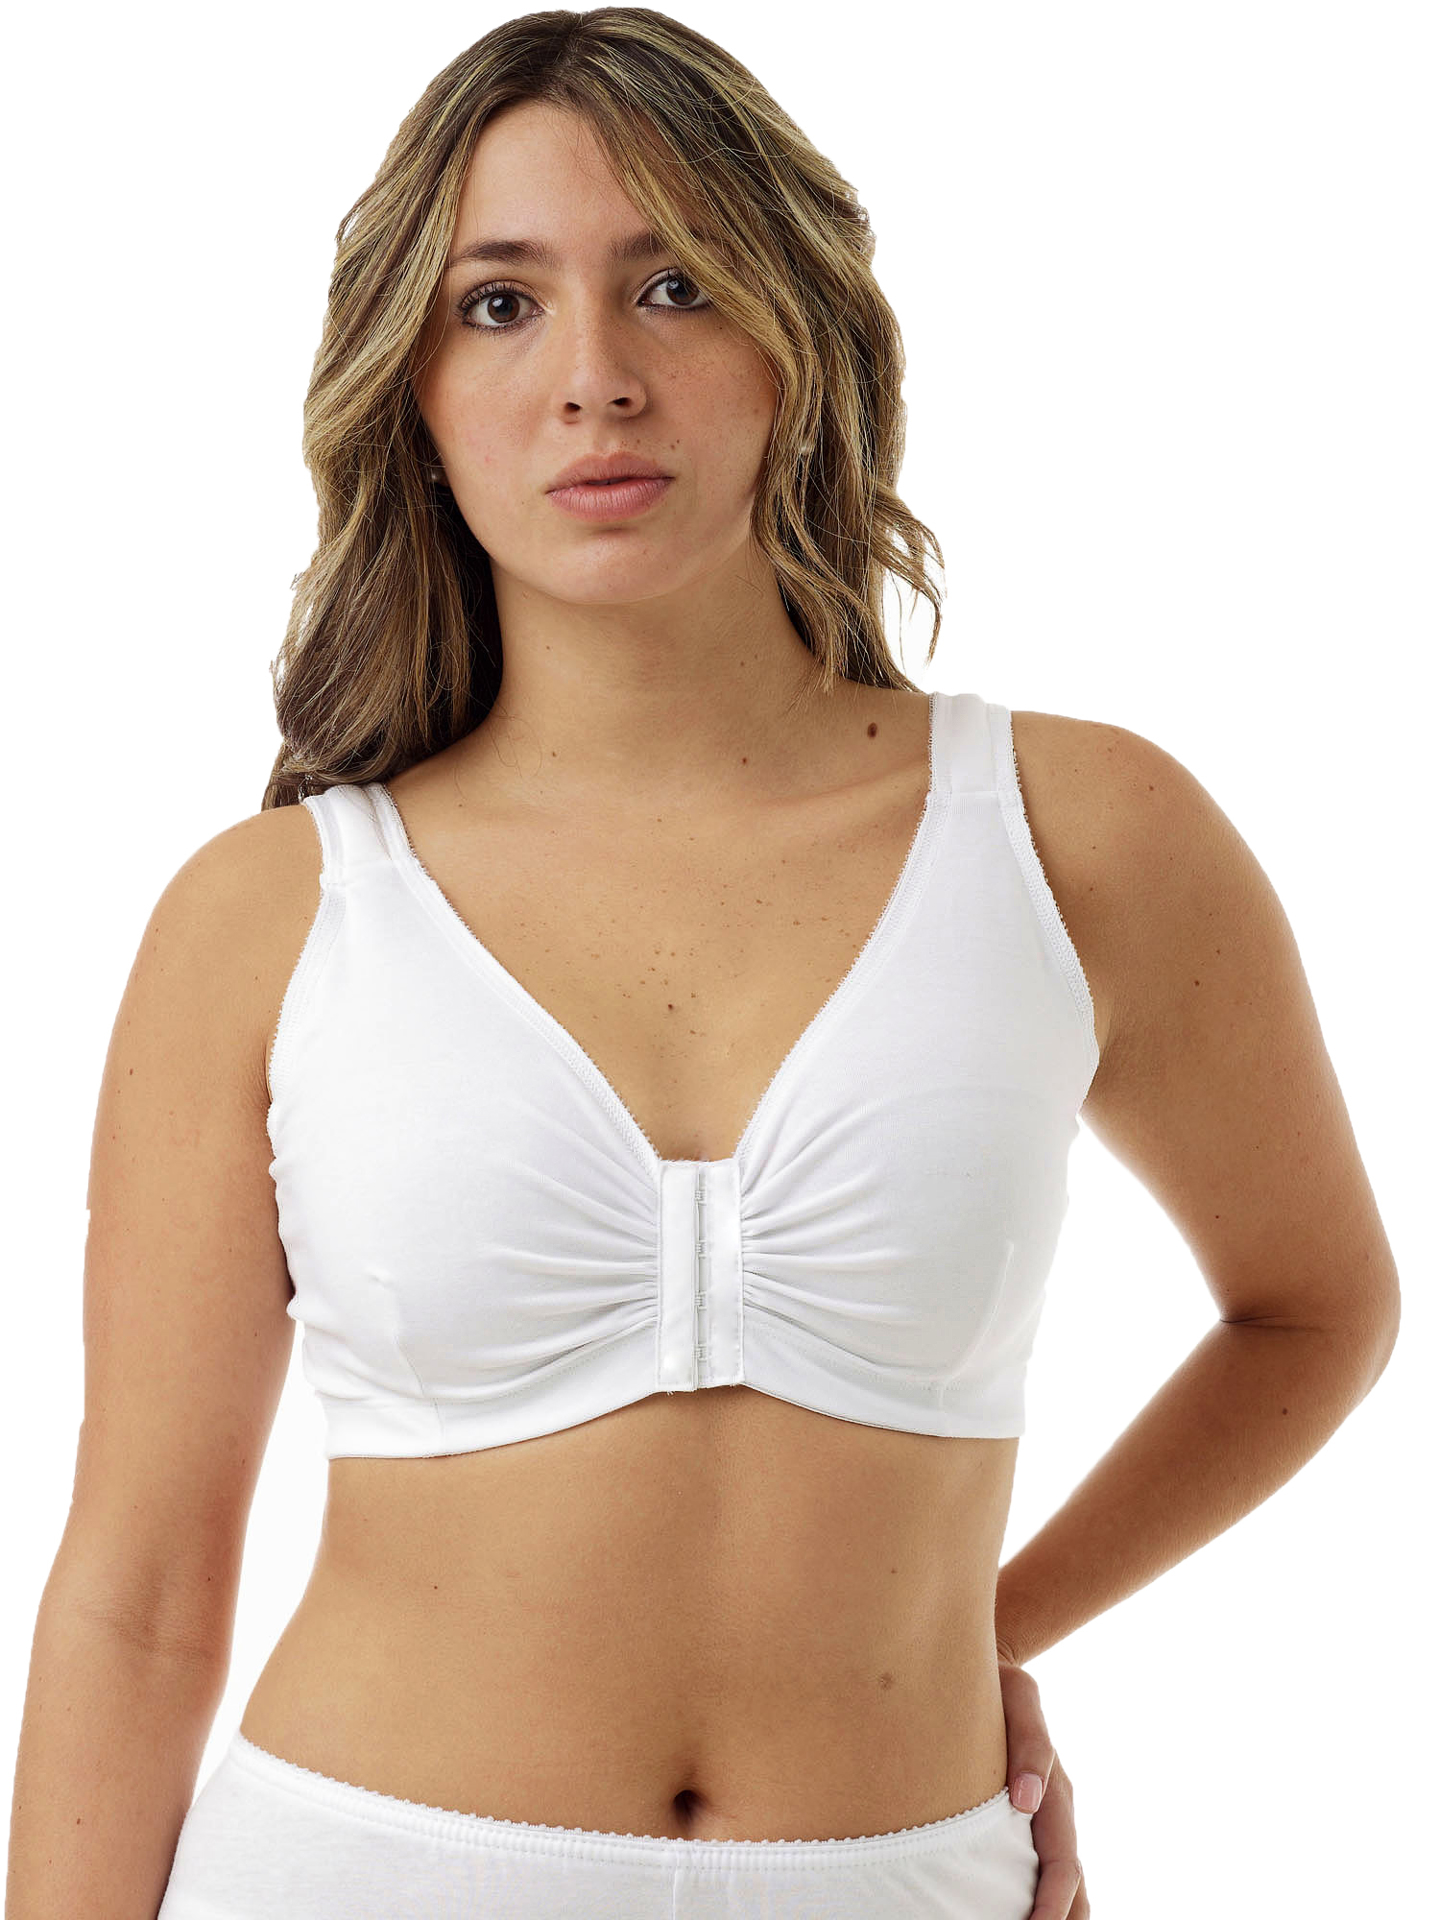 https://www.underworks.com/images/thumbs/0002135_mastitis-therapy-bra-with-pockets-hot-compress-pads-included-adjustable-postpartum-breast-engorgemen.jpeg